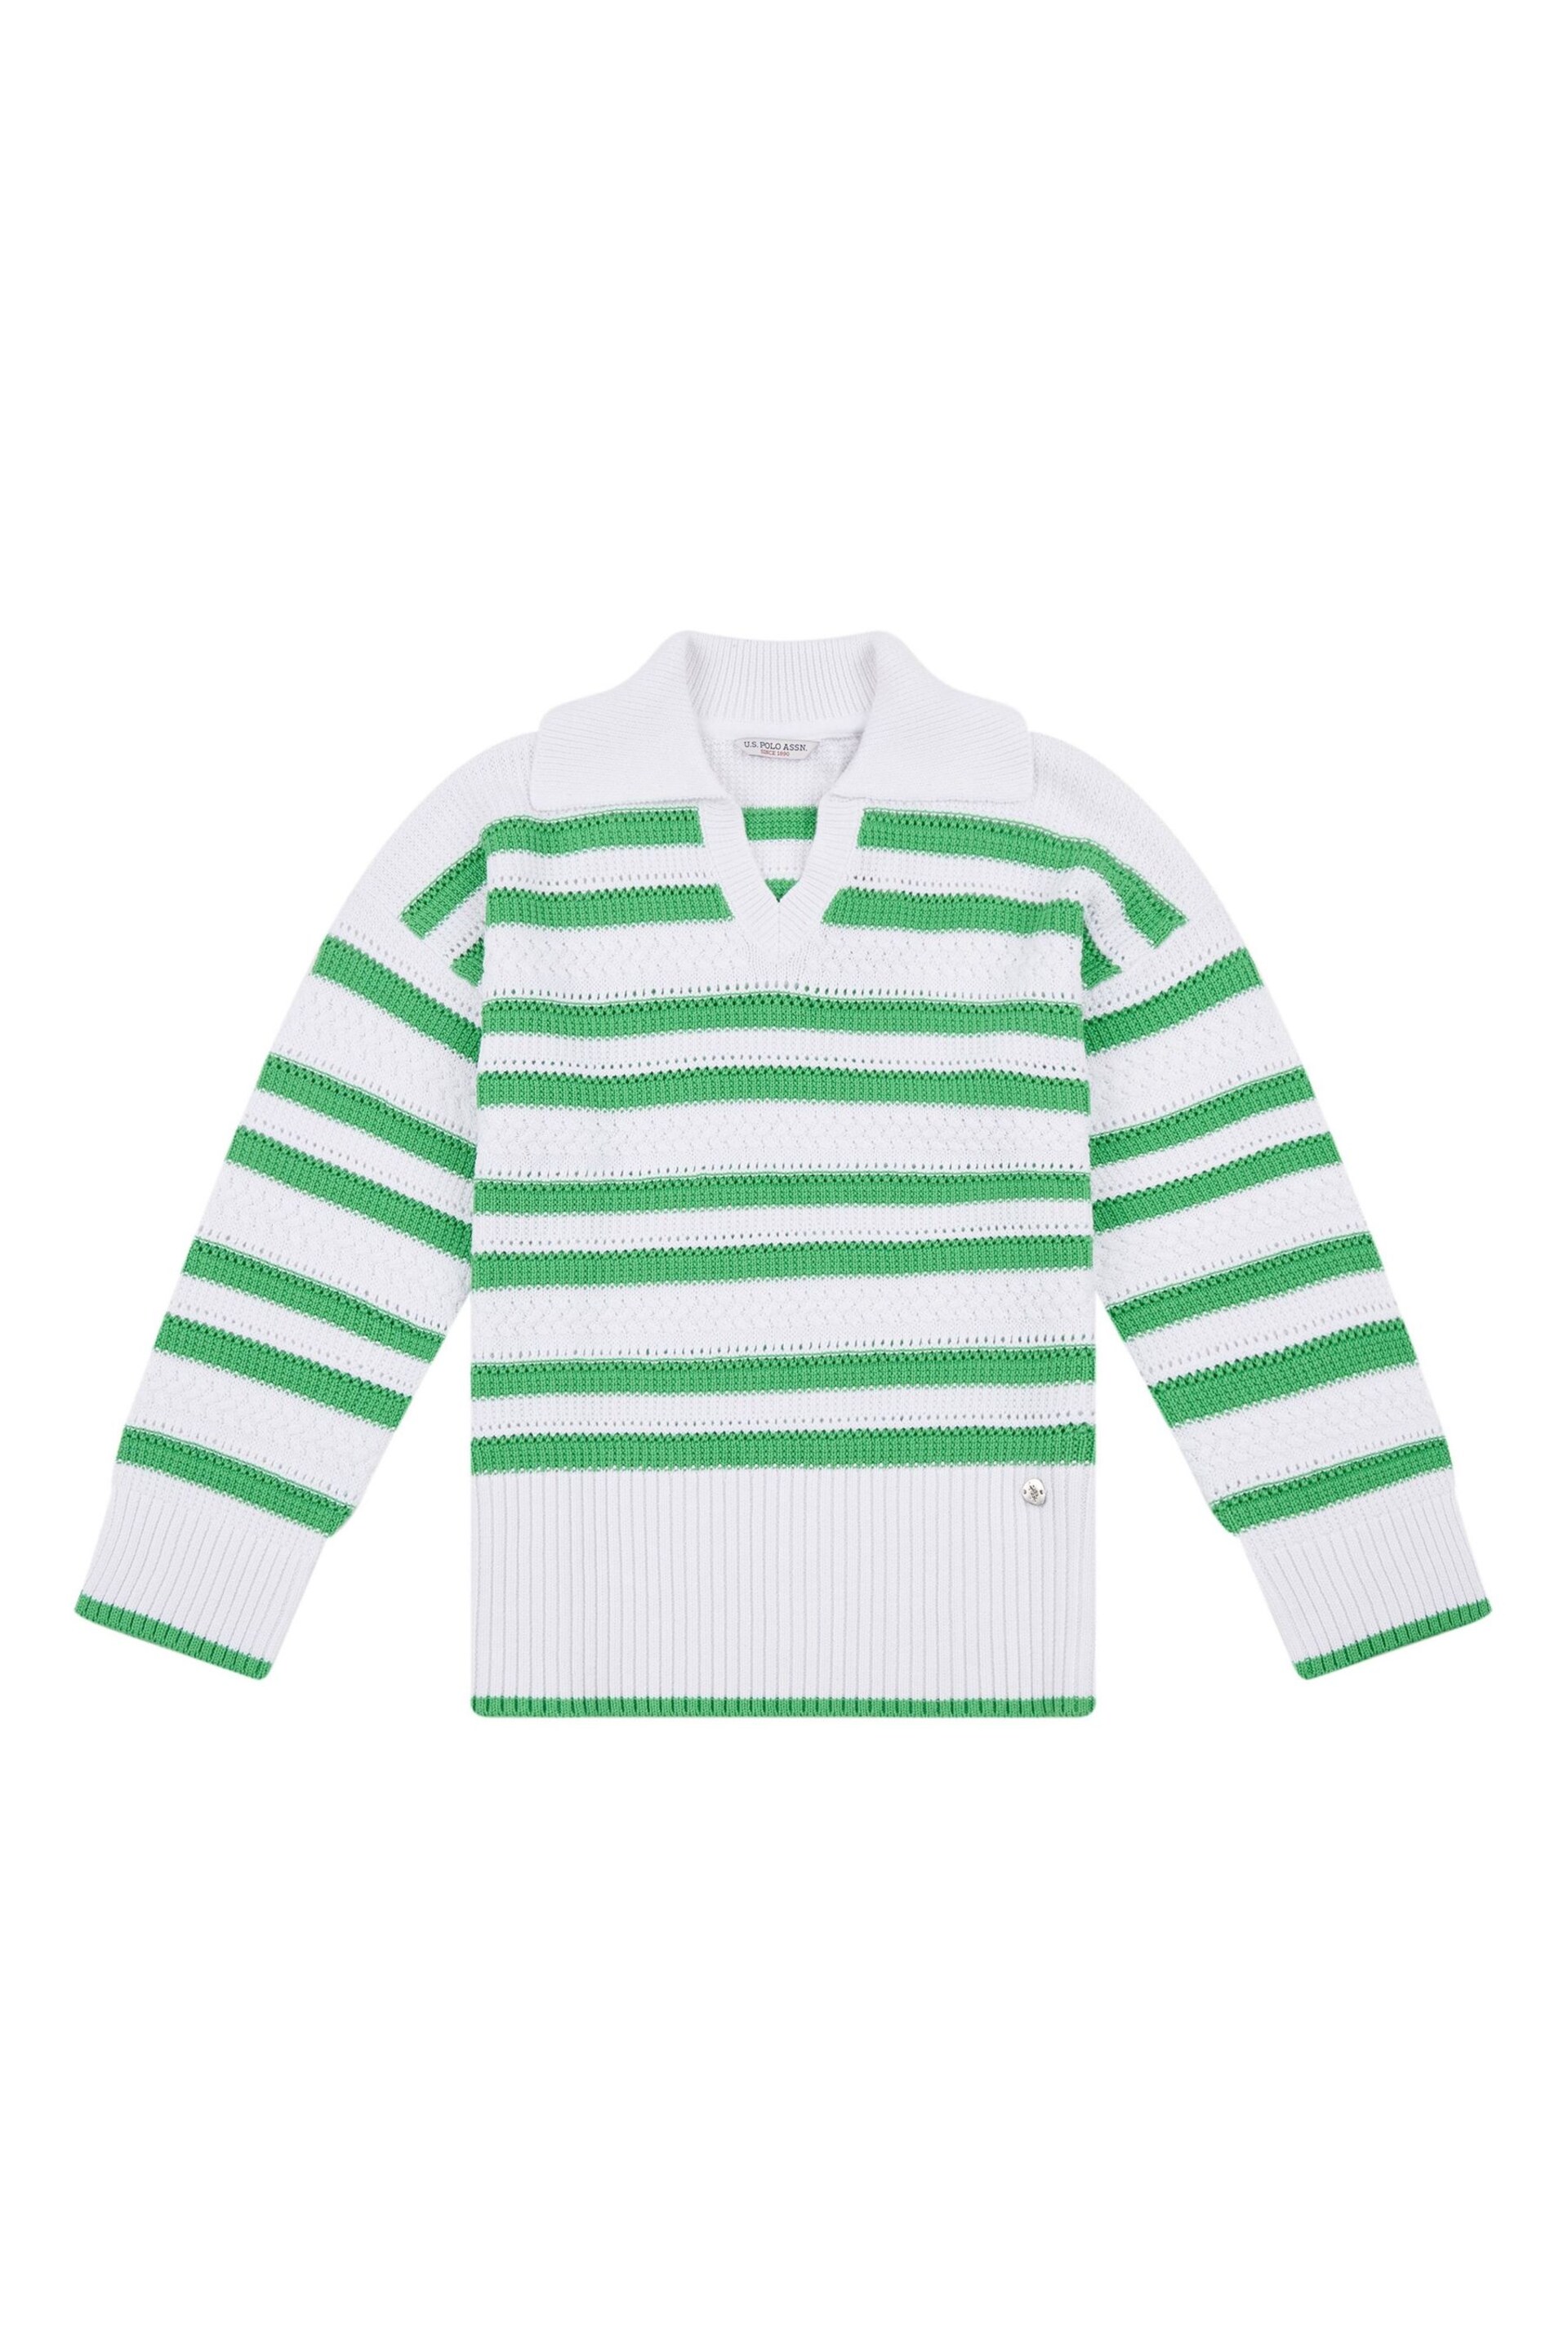 U.S. Polo Assn. Oversized Womens Green Pointelle Knit Collar Jumper - Image 7 of 9